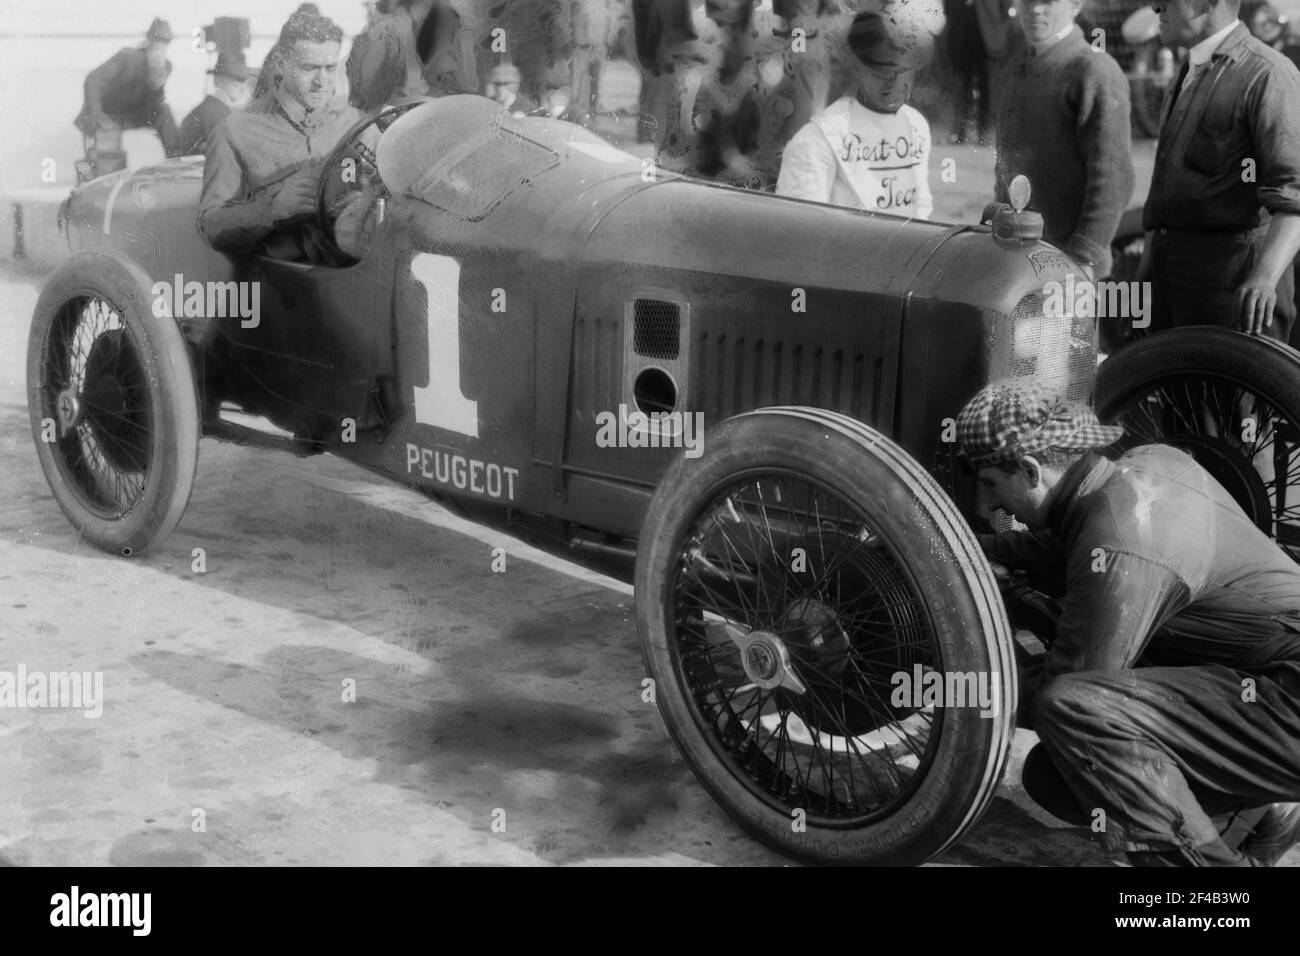 Dario Resta (1882-1924), an Italian-British racecar driver who came in a close second at the 1915 Indianapolis 500 Stock Photo